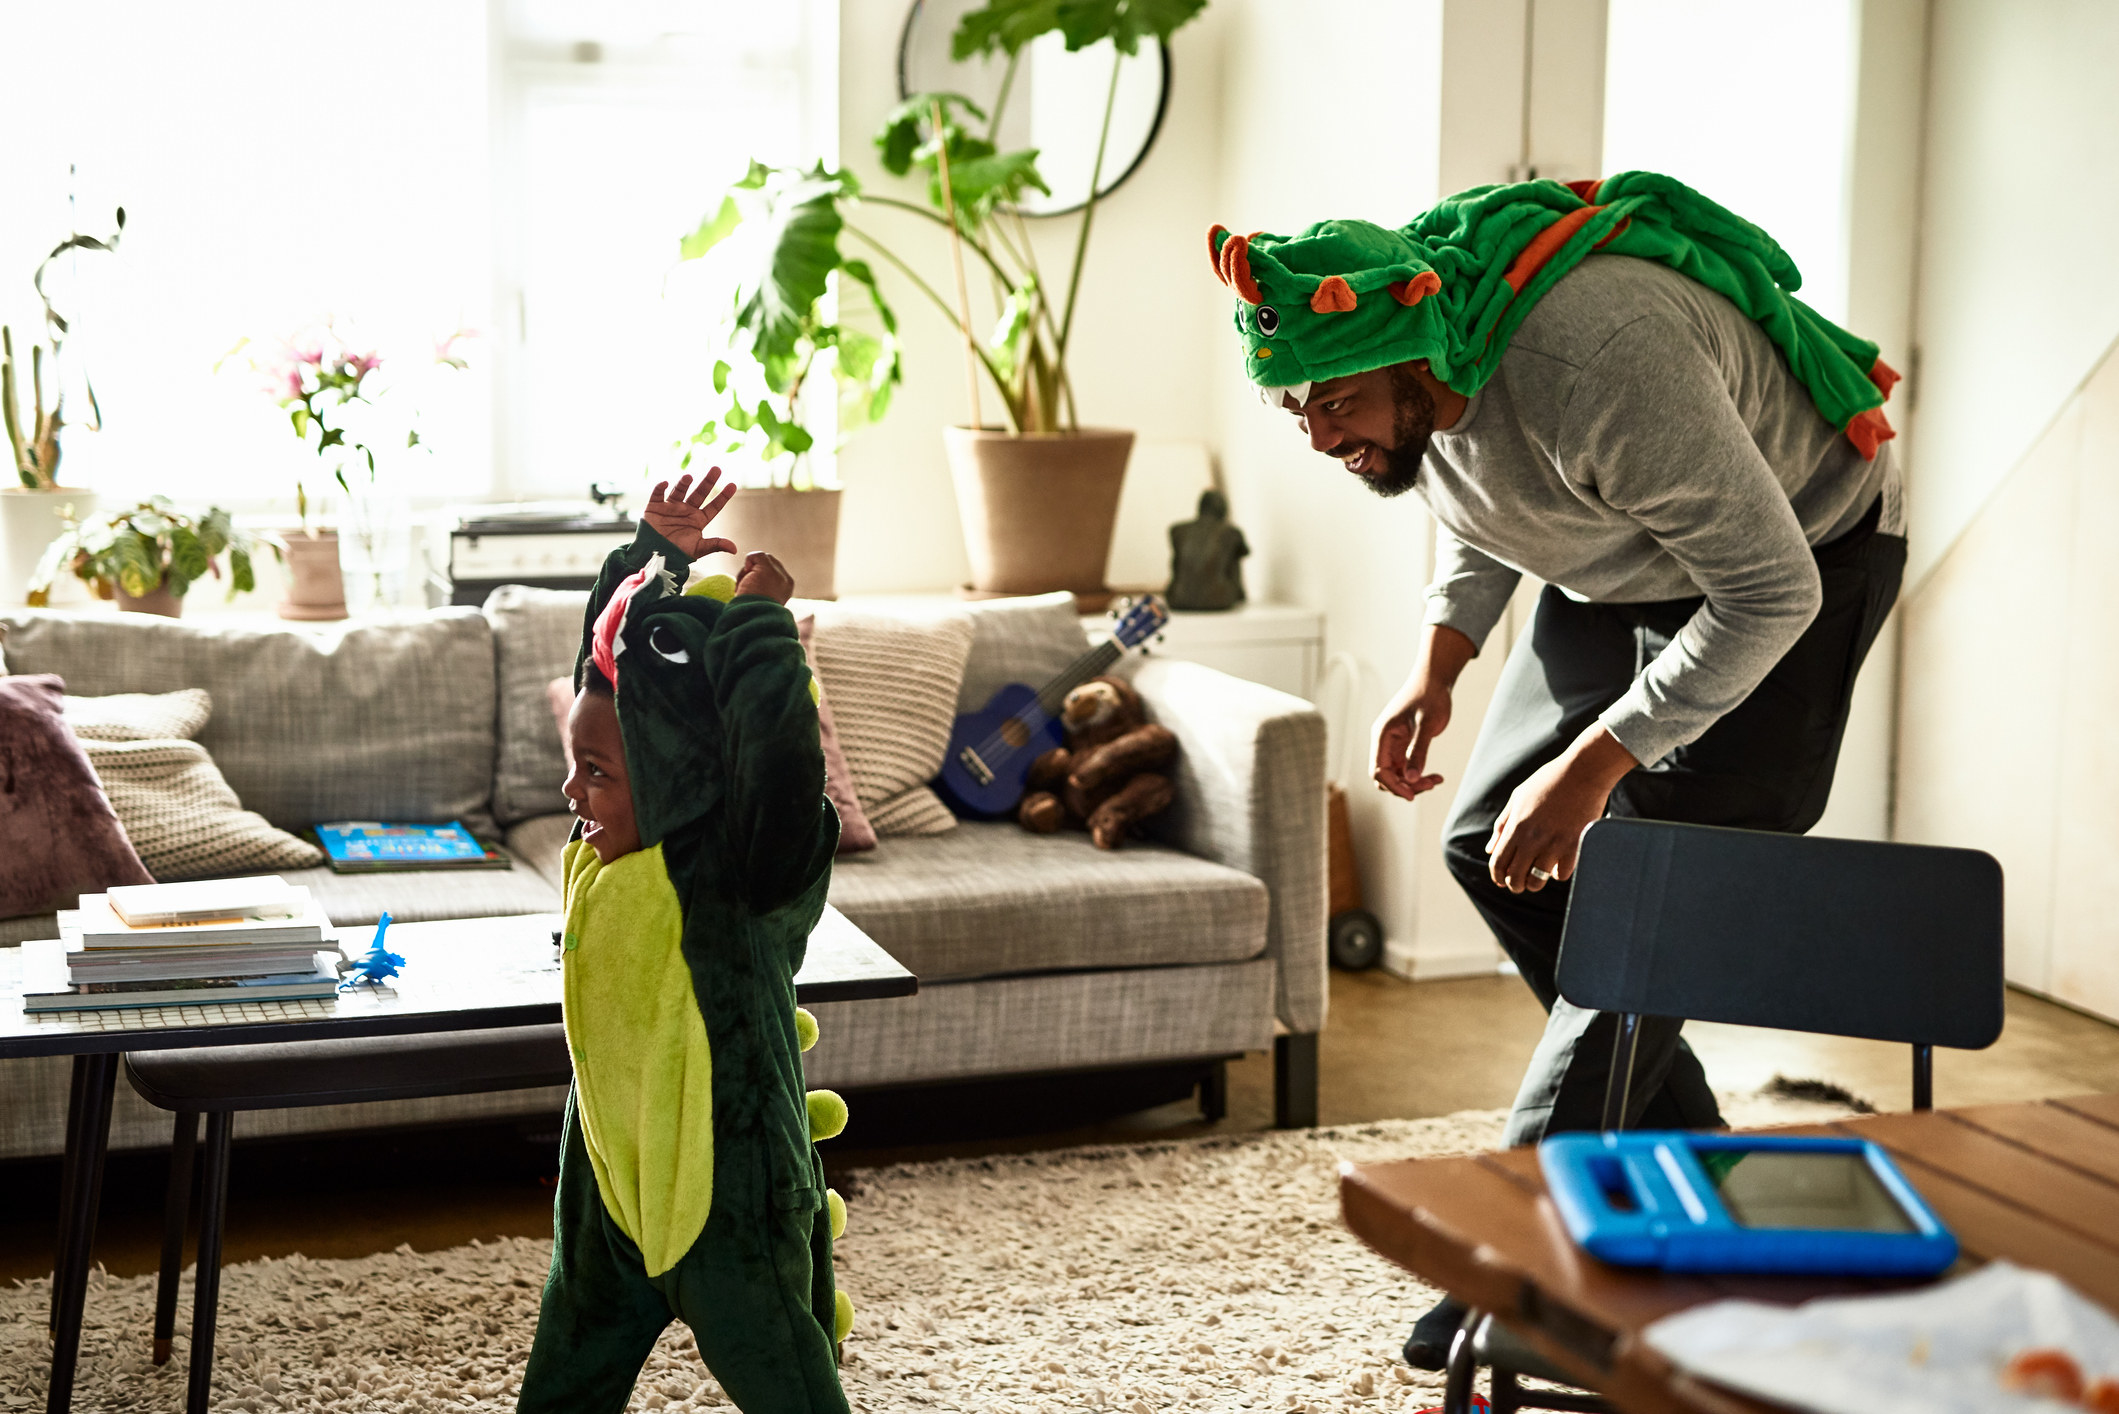 A parent in a dinosaur costume chases a child in a dinosaur onesie